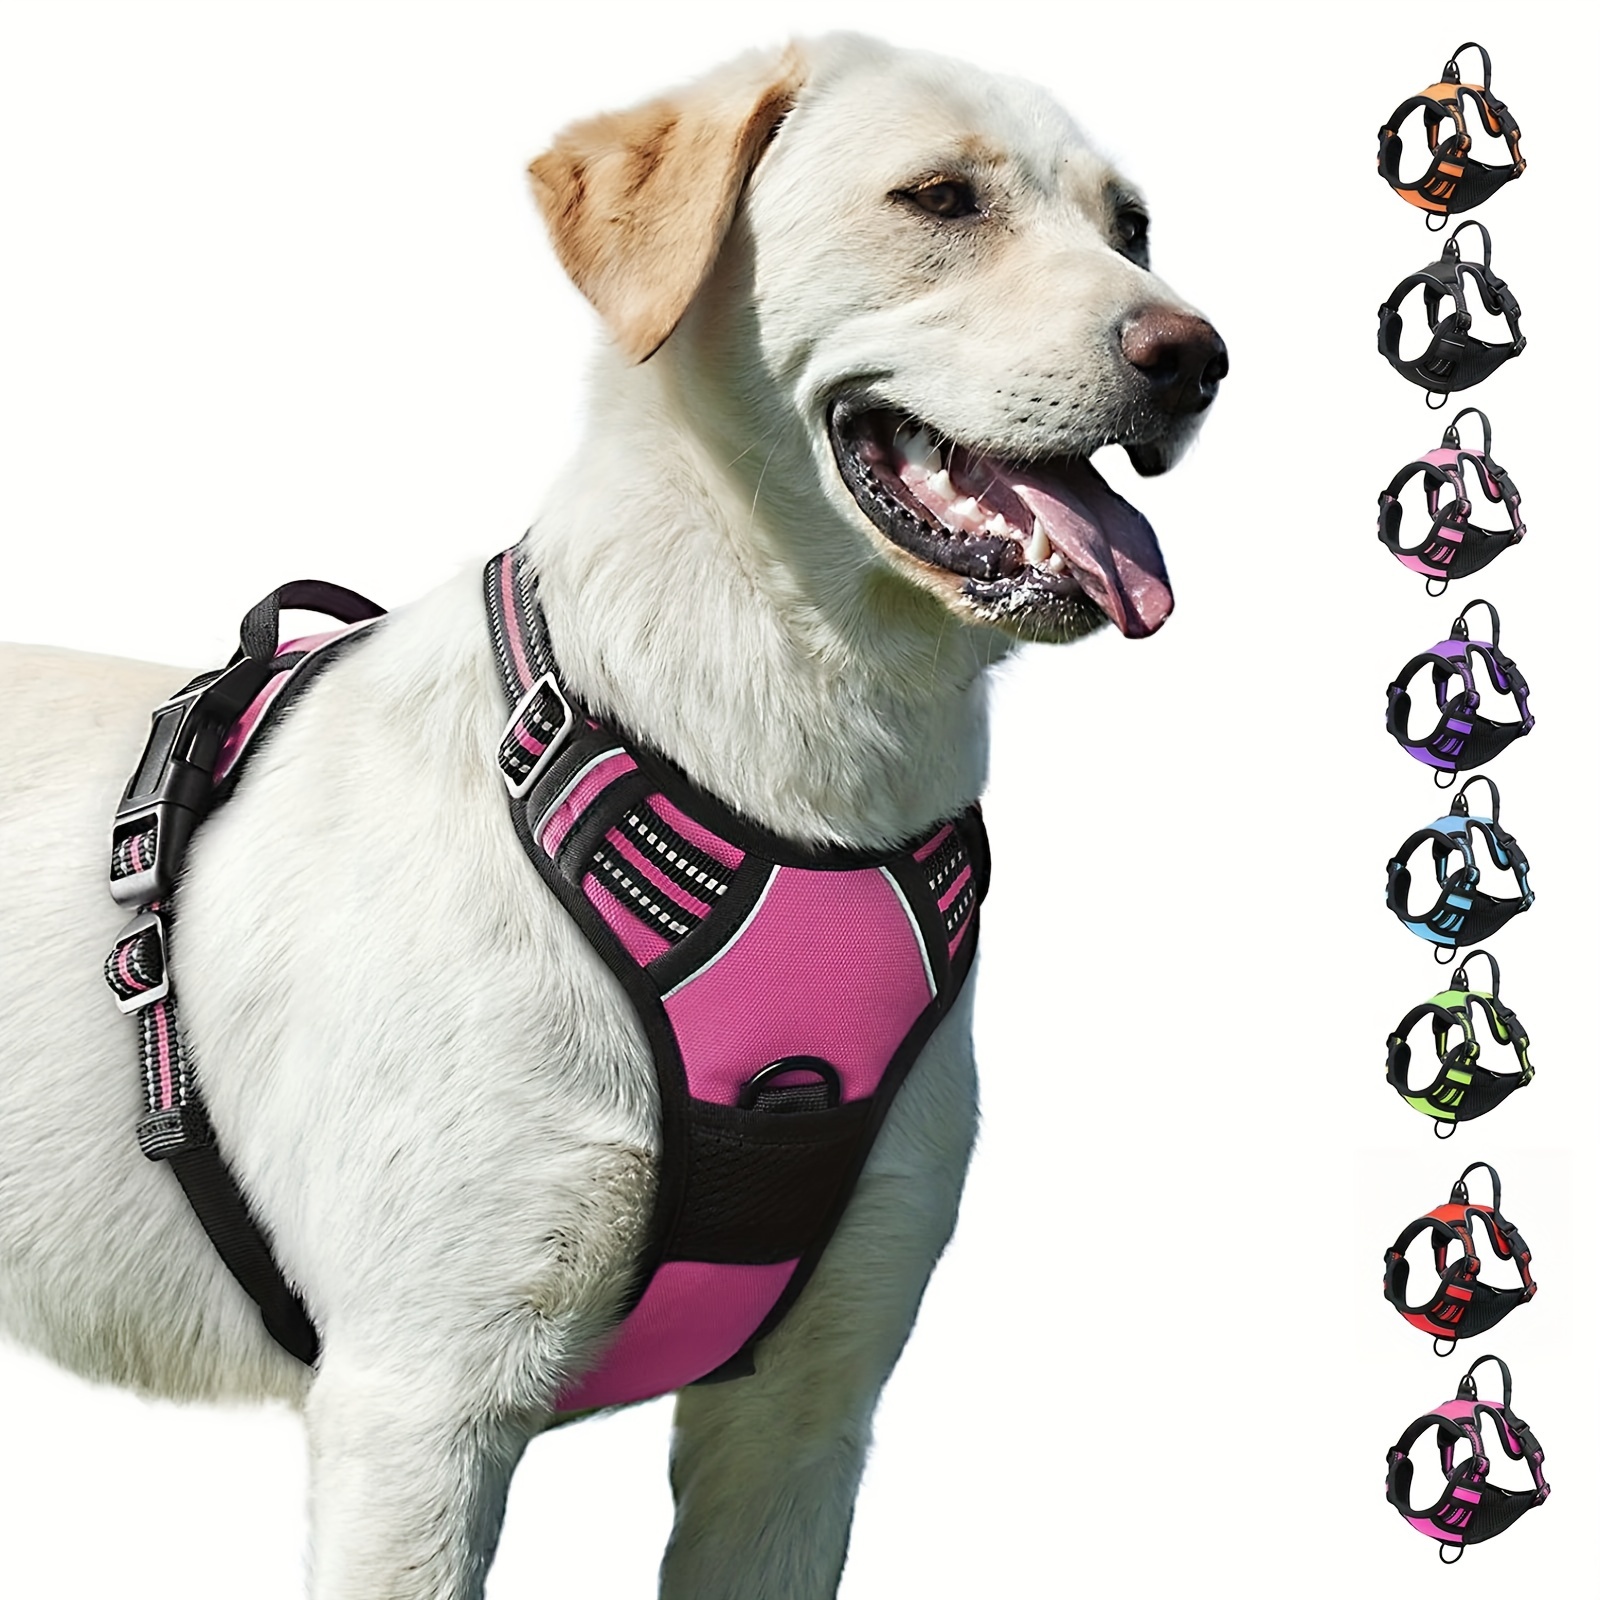 

1pc Reflective No-pull Dog Harness For Medium And Large Dogs - Easy Walking And Durable Oxford Material